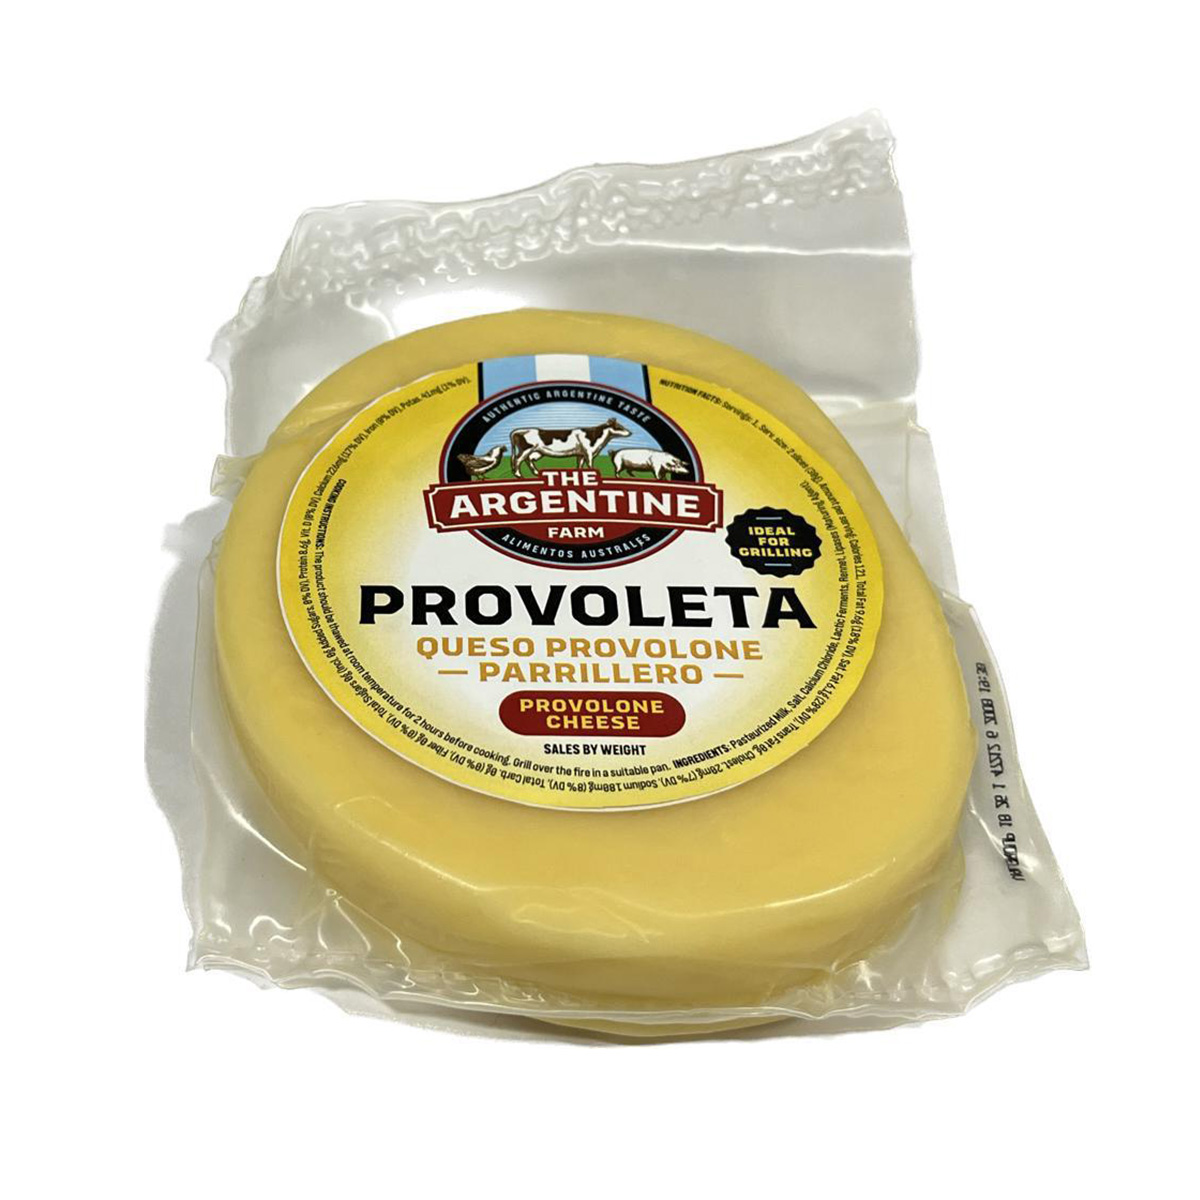 Provolone oz. Barbecue The | x Alimentos 8.11 Farm 42 Australes Cheese Argentine